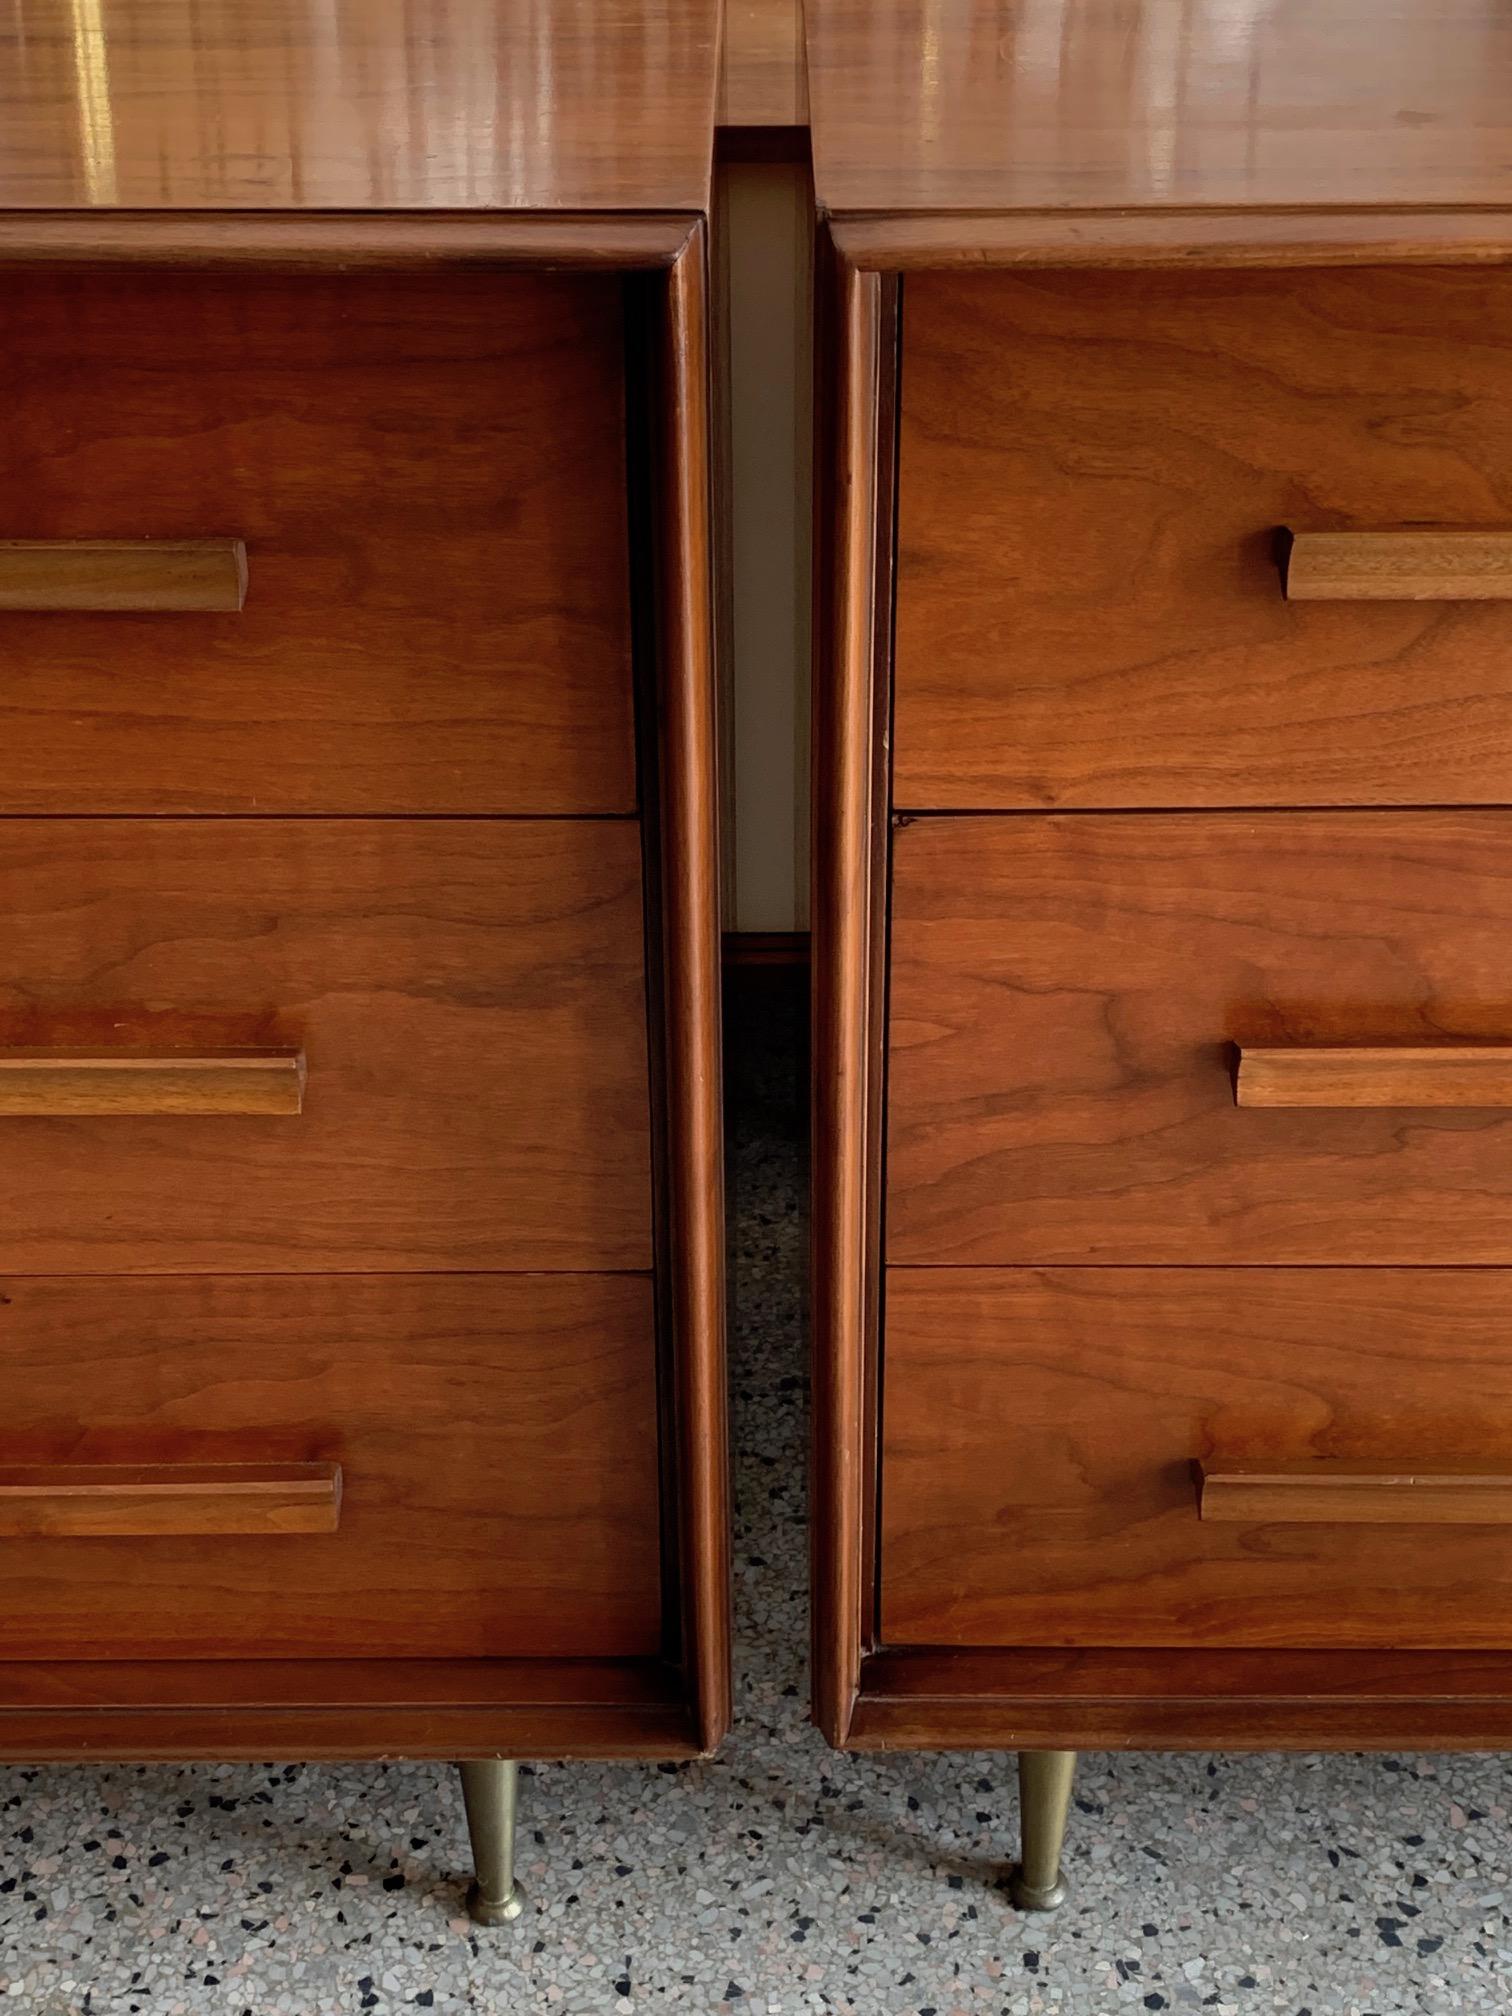 A pair of classic three-drawer Widdicomb chests, circa 1950s attributed to T.H.Robsjohn-Gibbings. Featuring elegant 